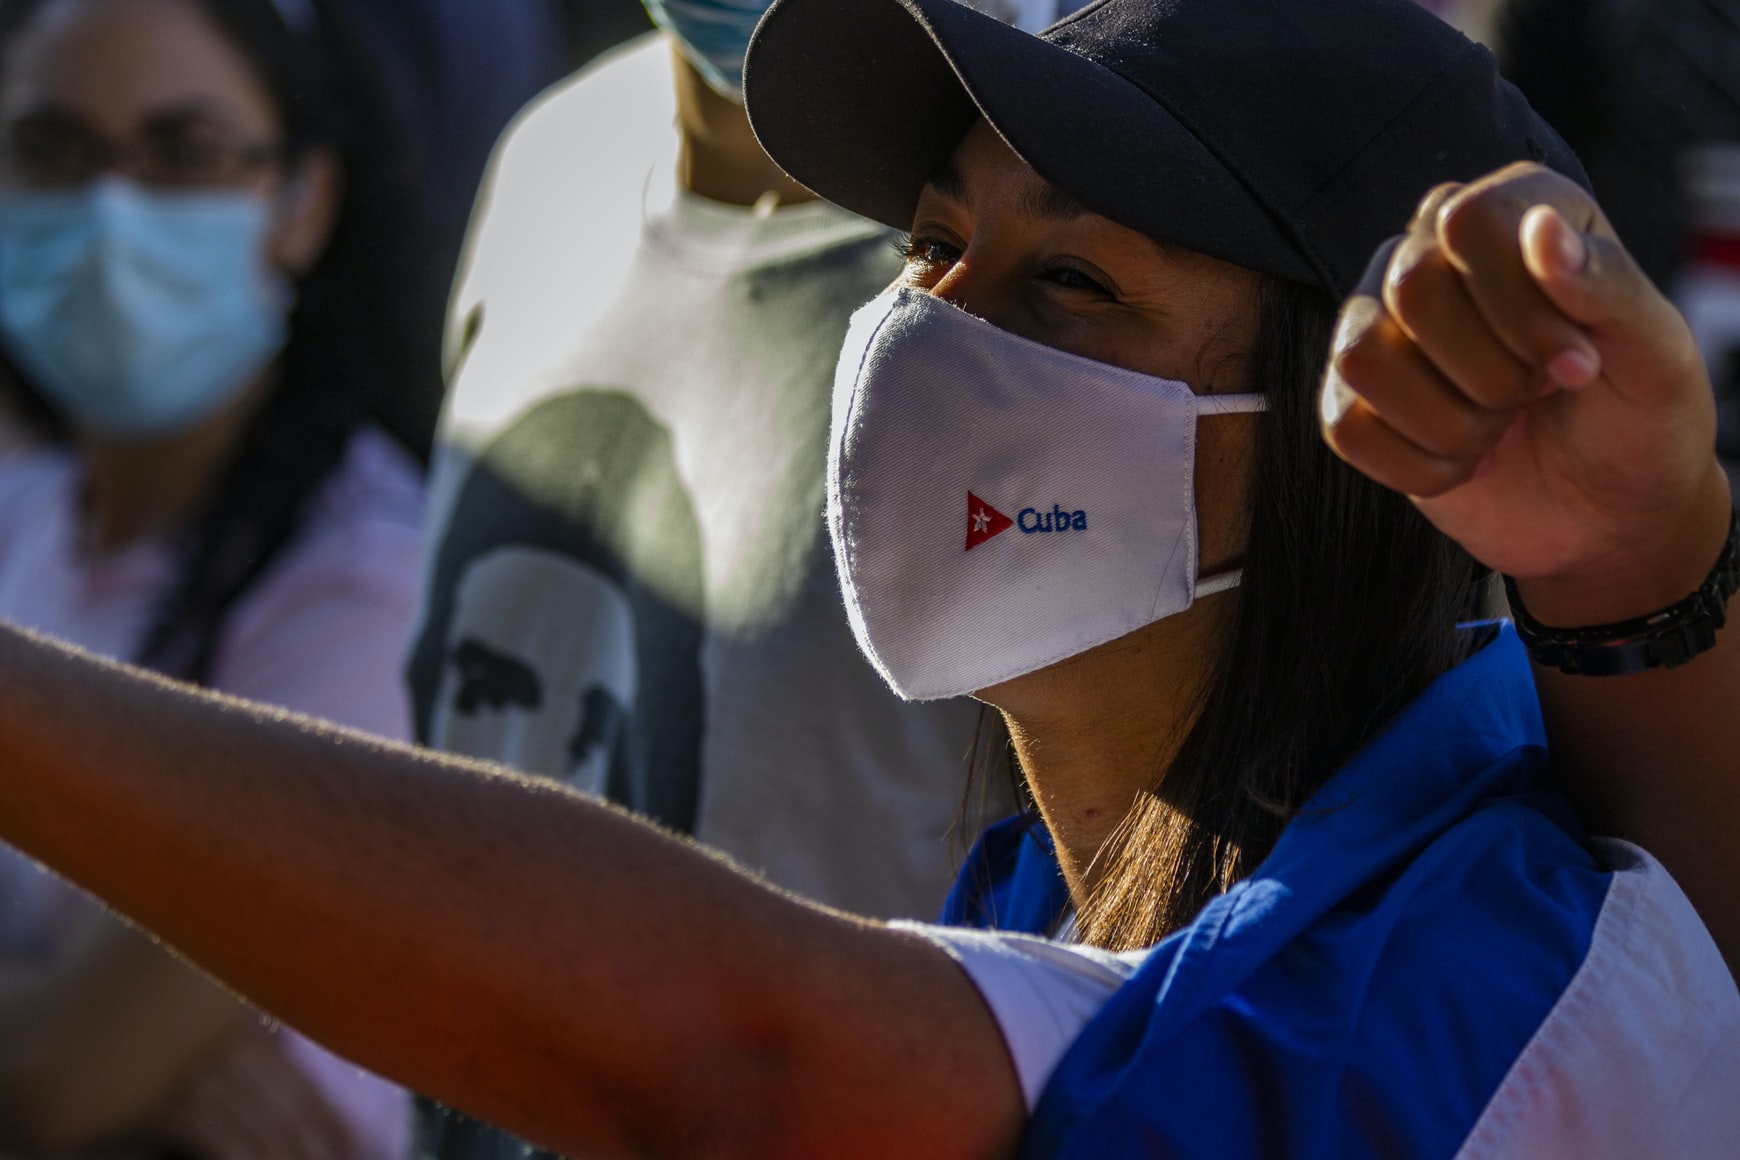 A woman wearing a face mask that says "Cuba".